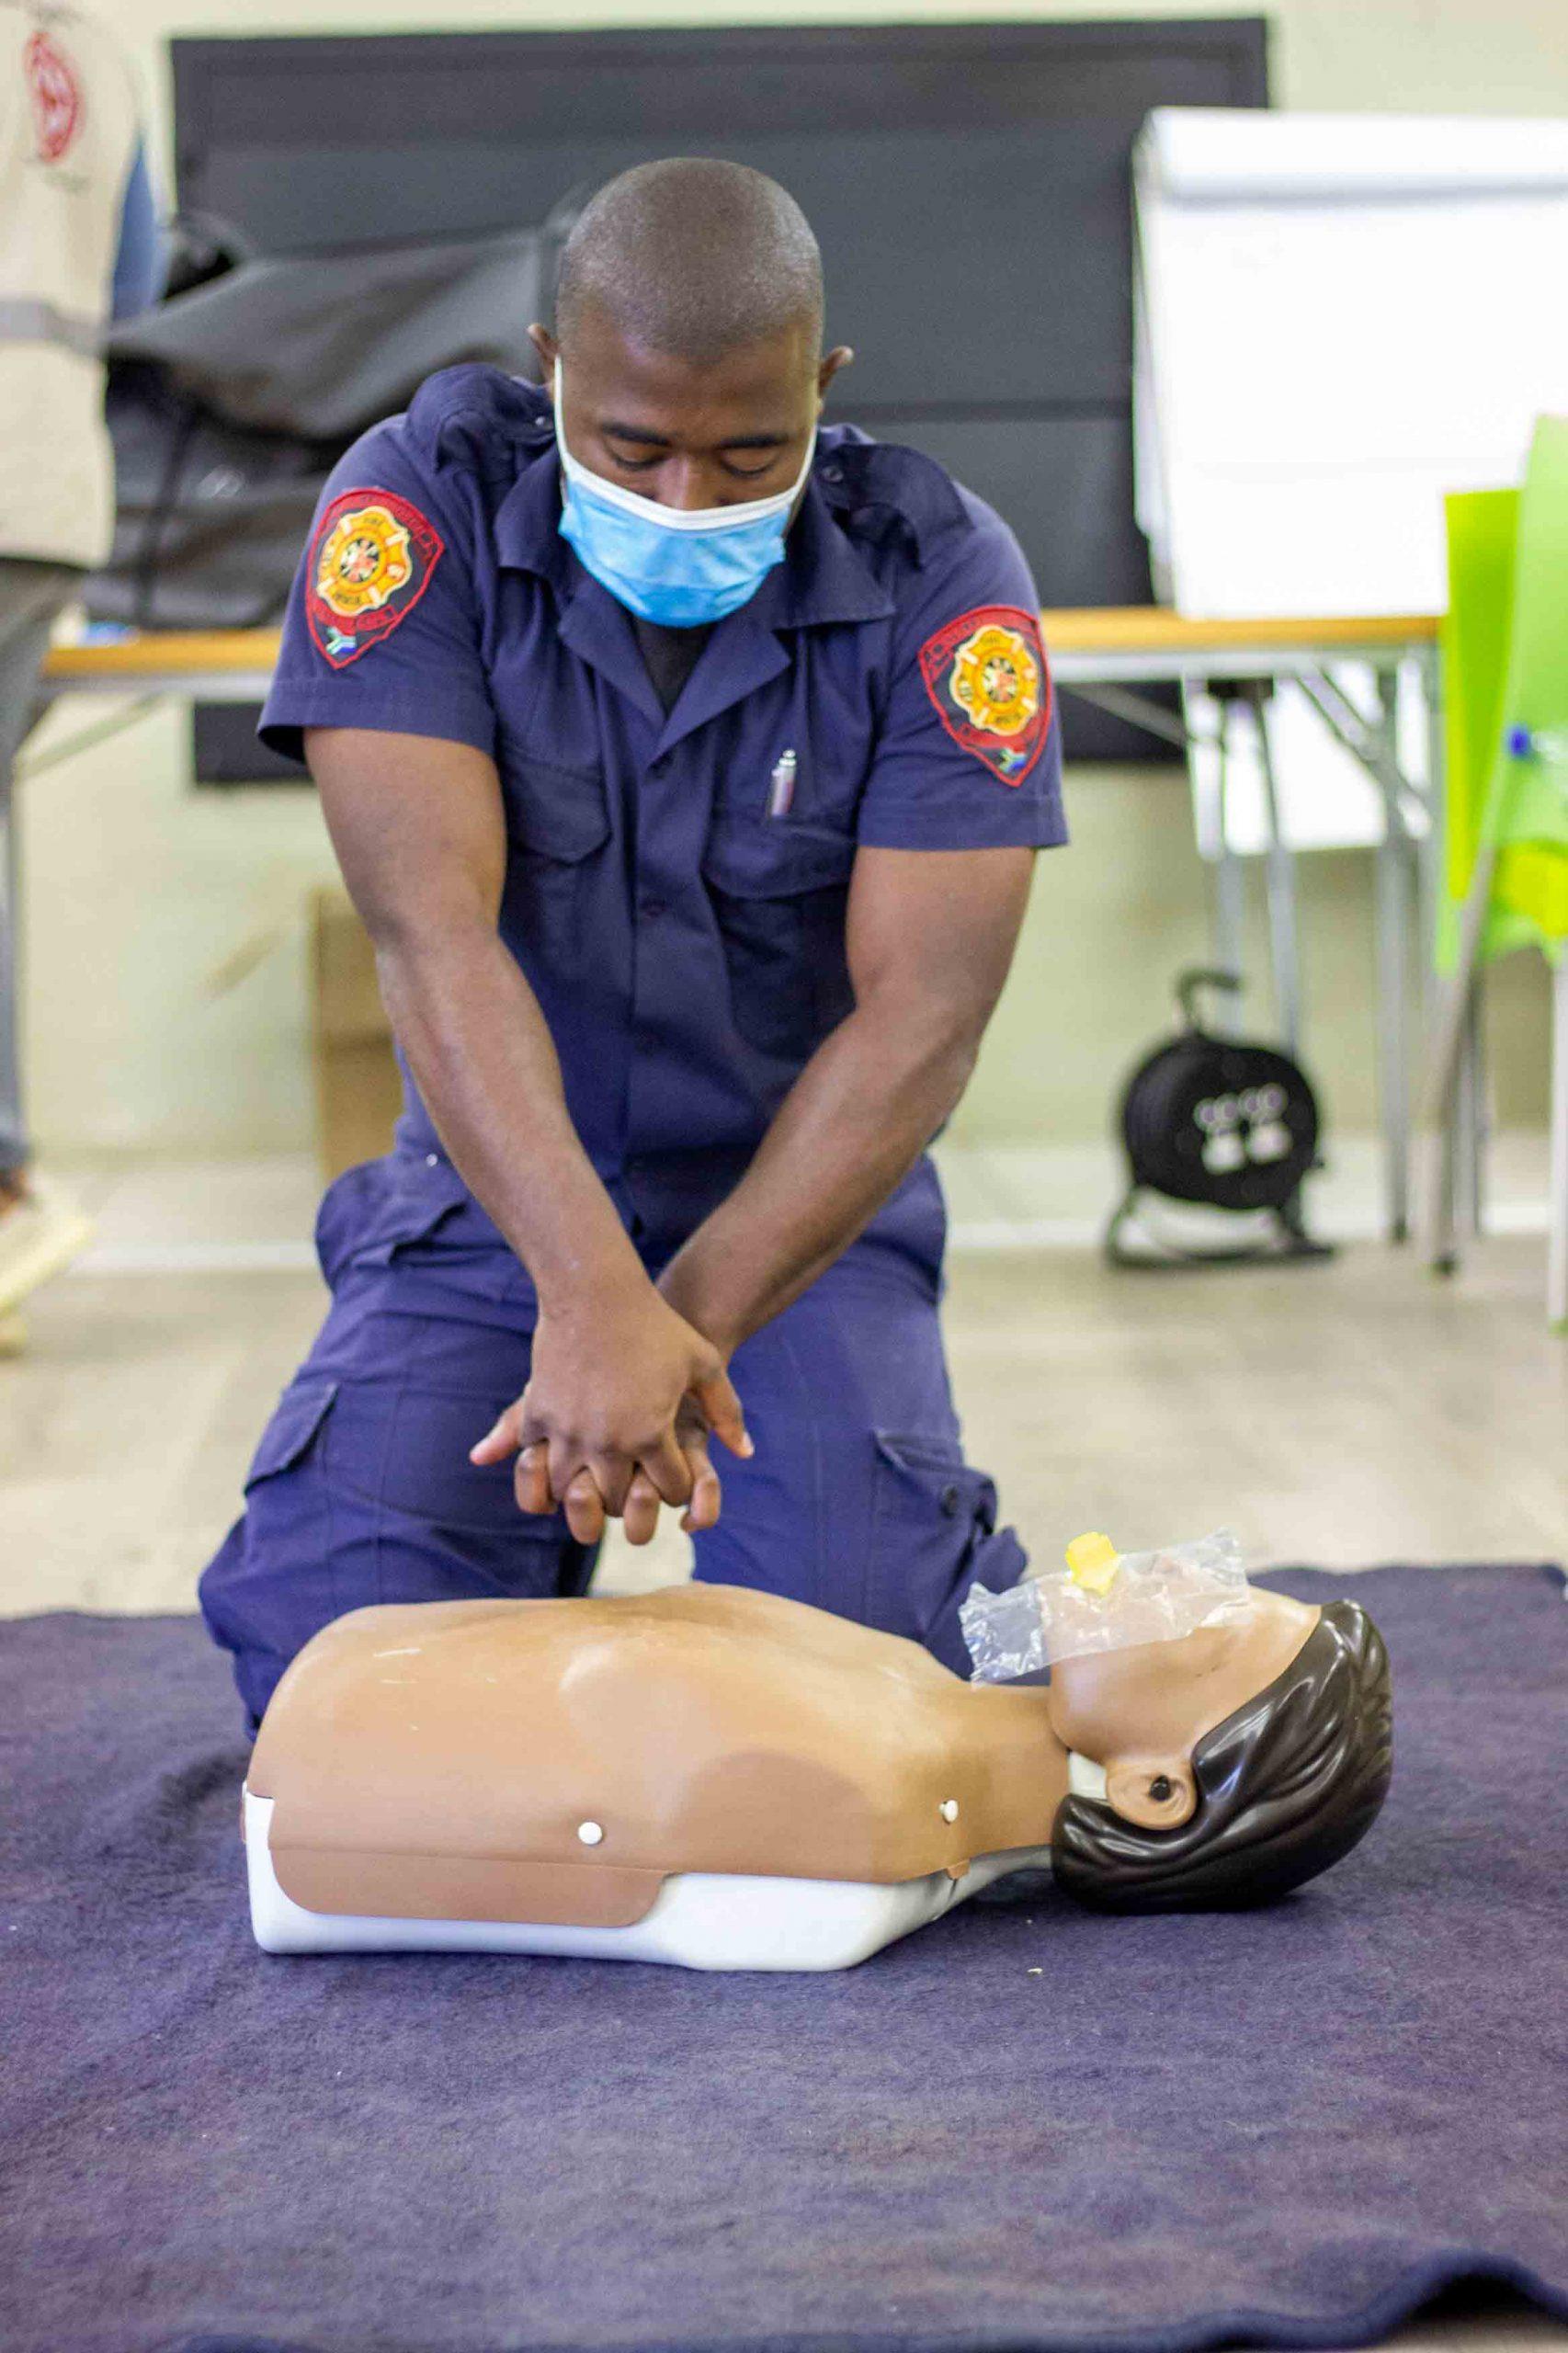 Disaster Management First Aid Course